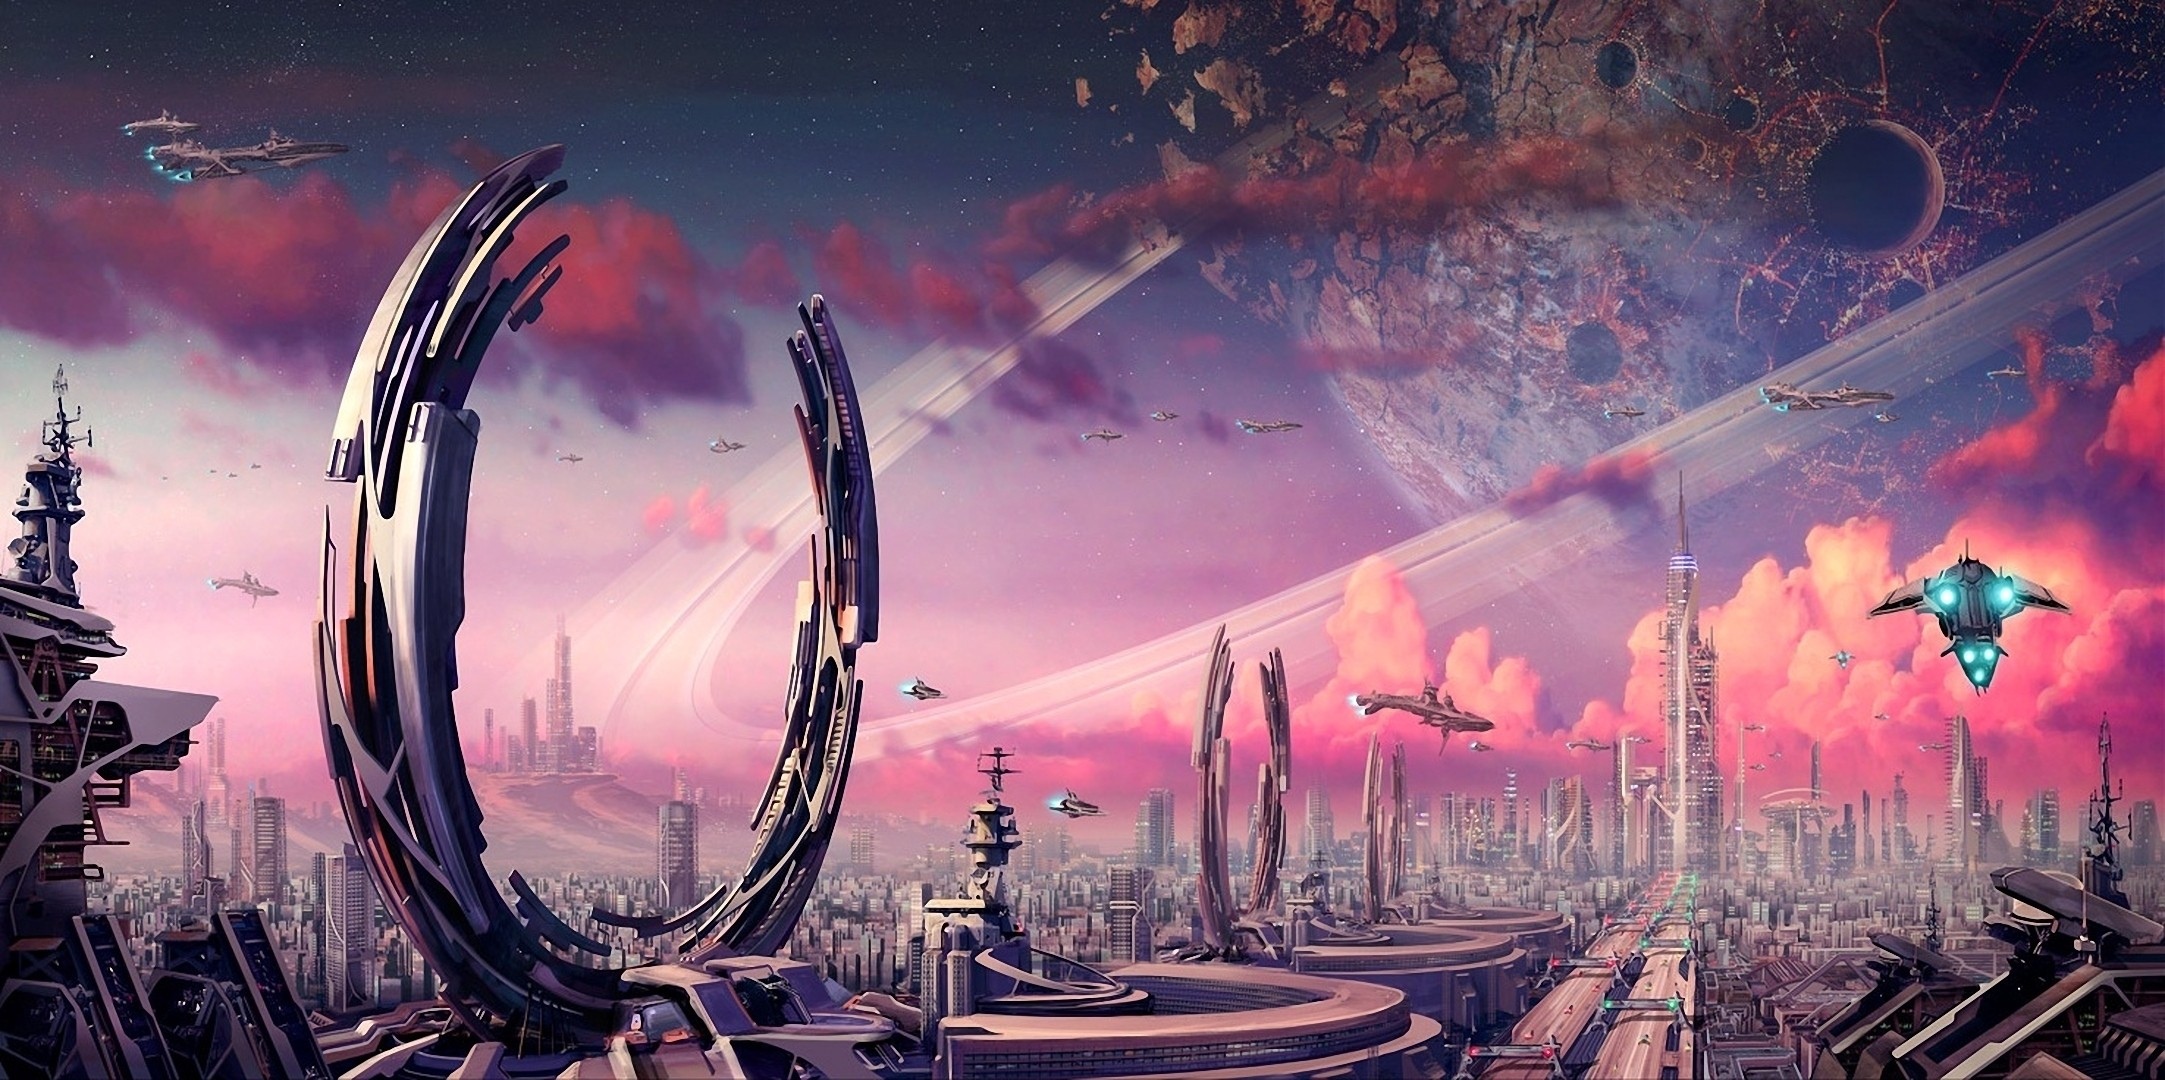 that's incredible, fiction, transport, fantasy, ships, rings, city, planet, crater, constructions, facilities